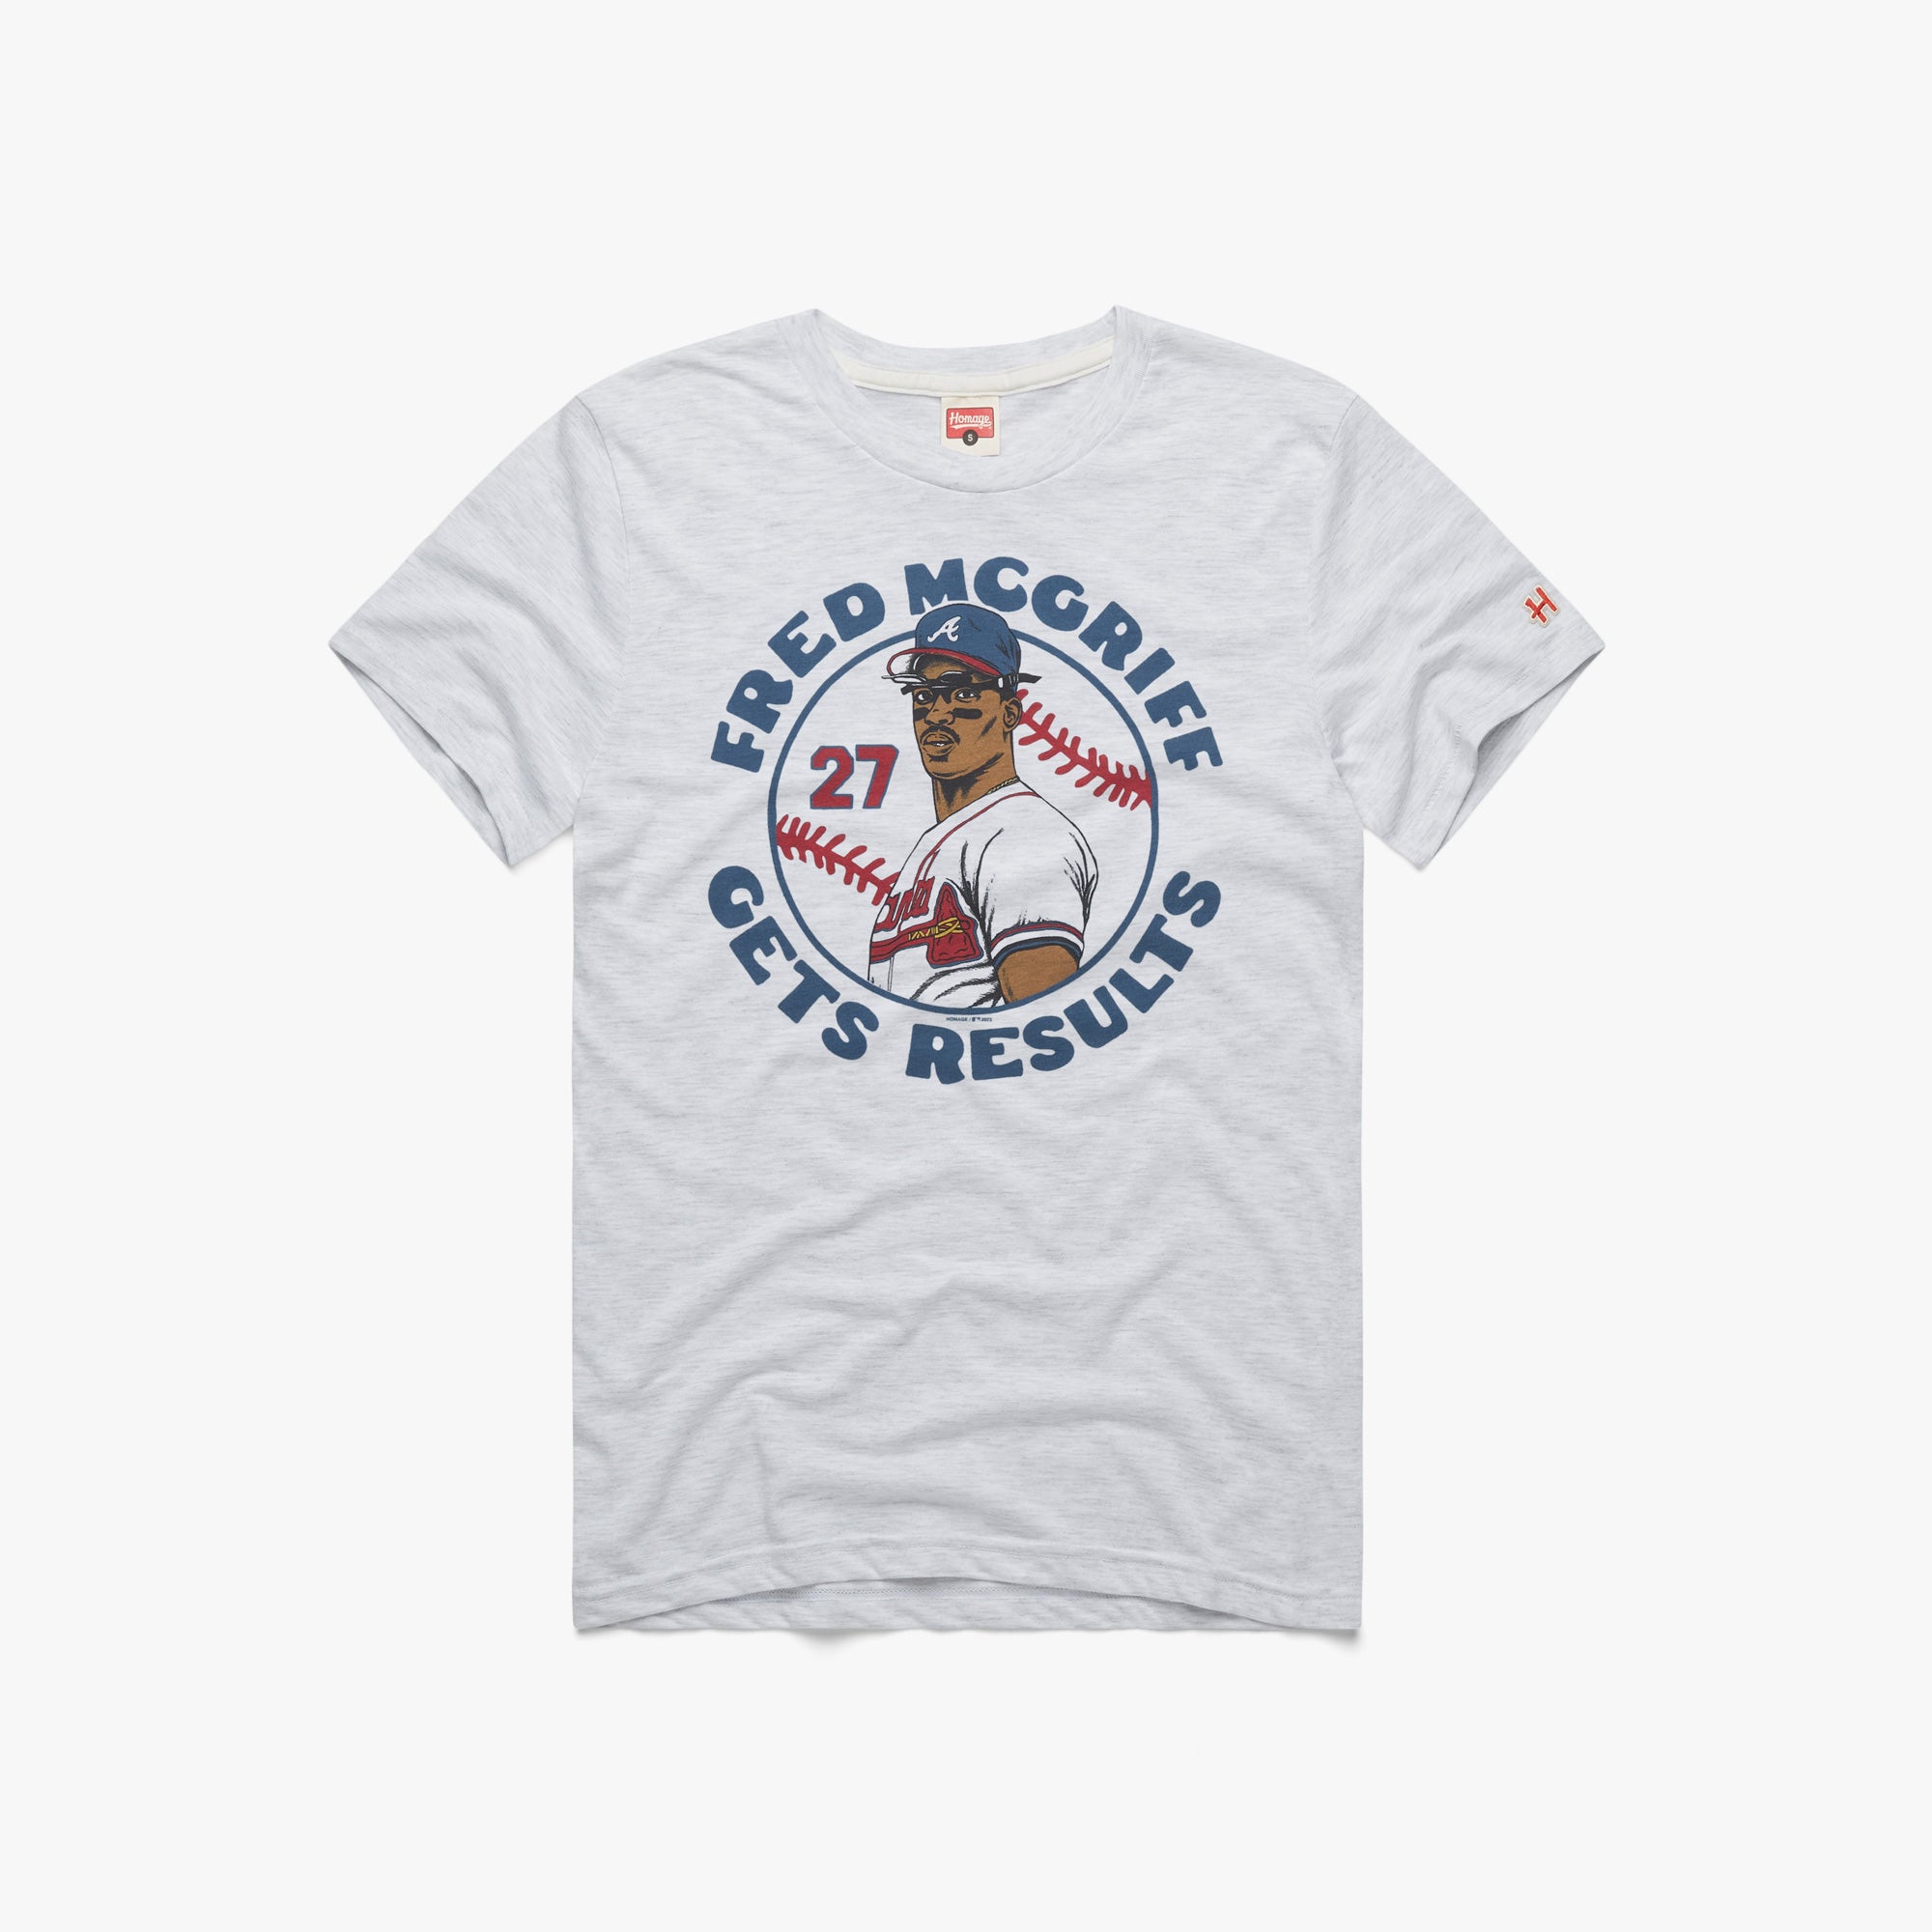 Atlanta Braves Fred McGriff Gets Results T-Shirt from Homage. | Ash | Vintage Apparel from Homage.